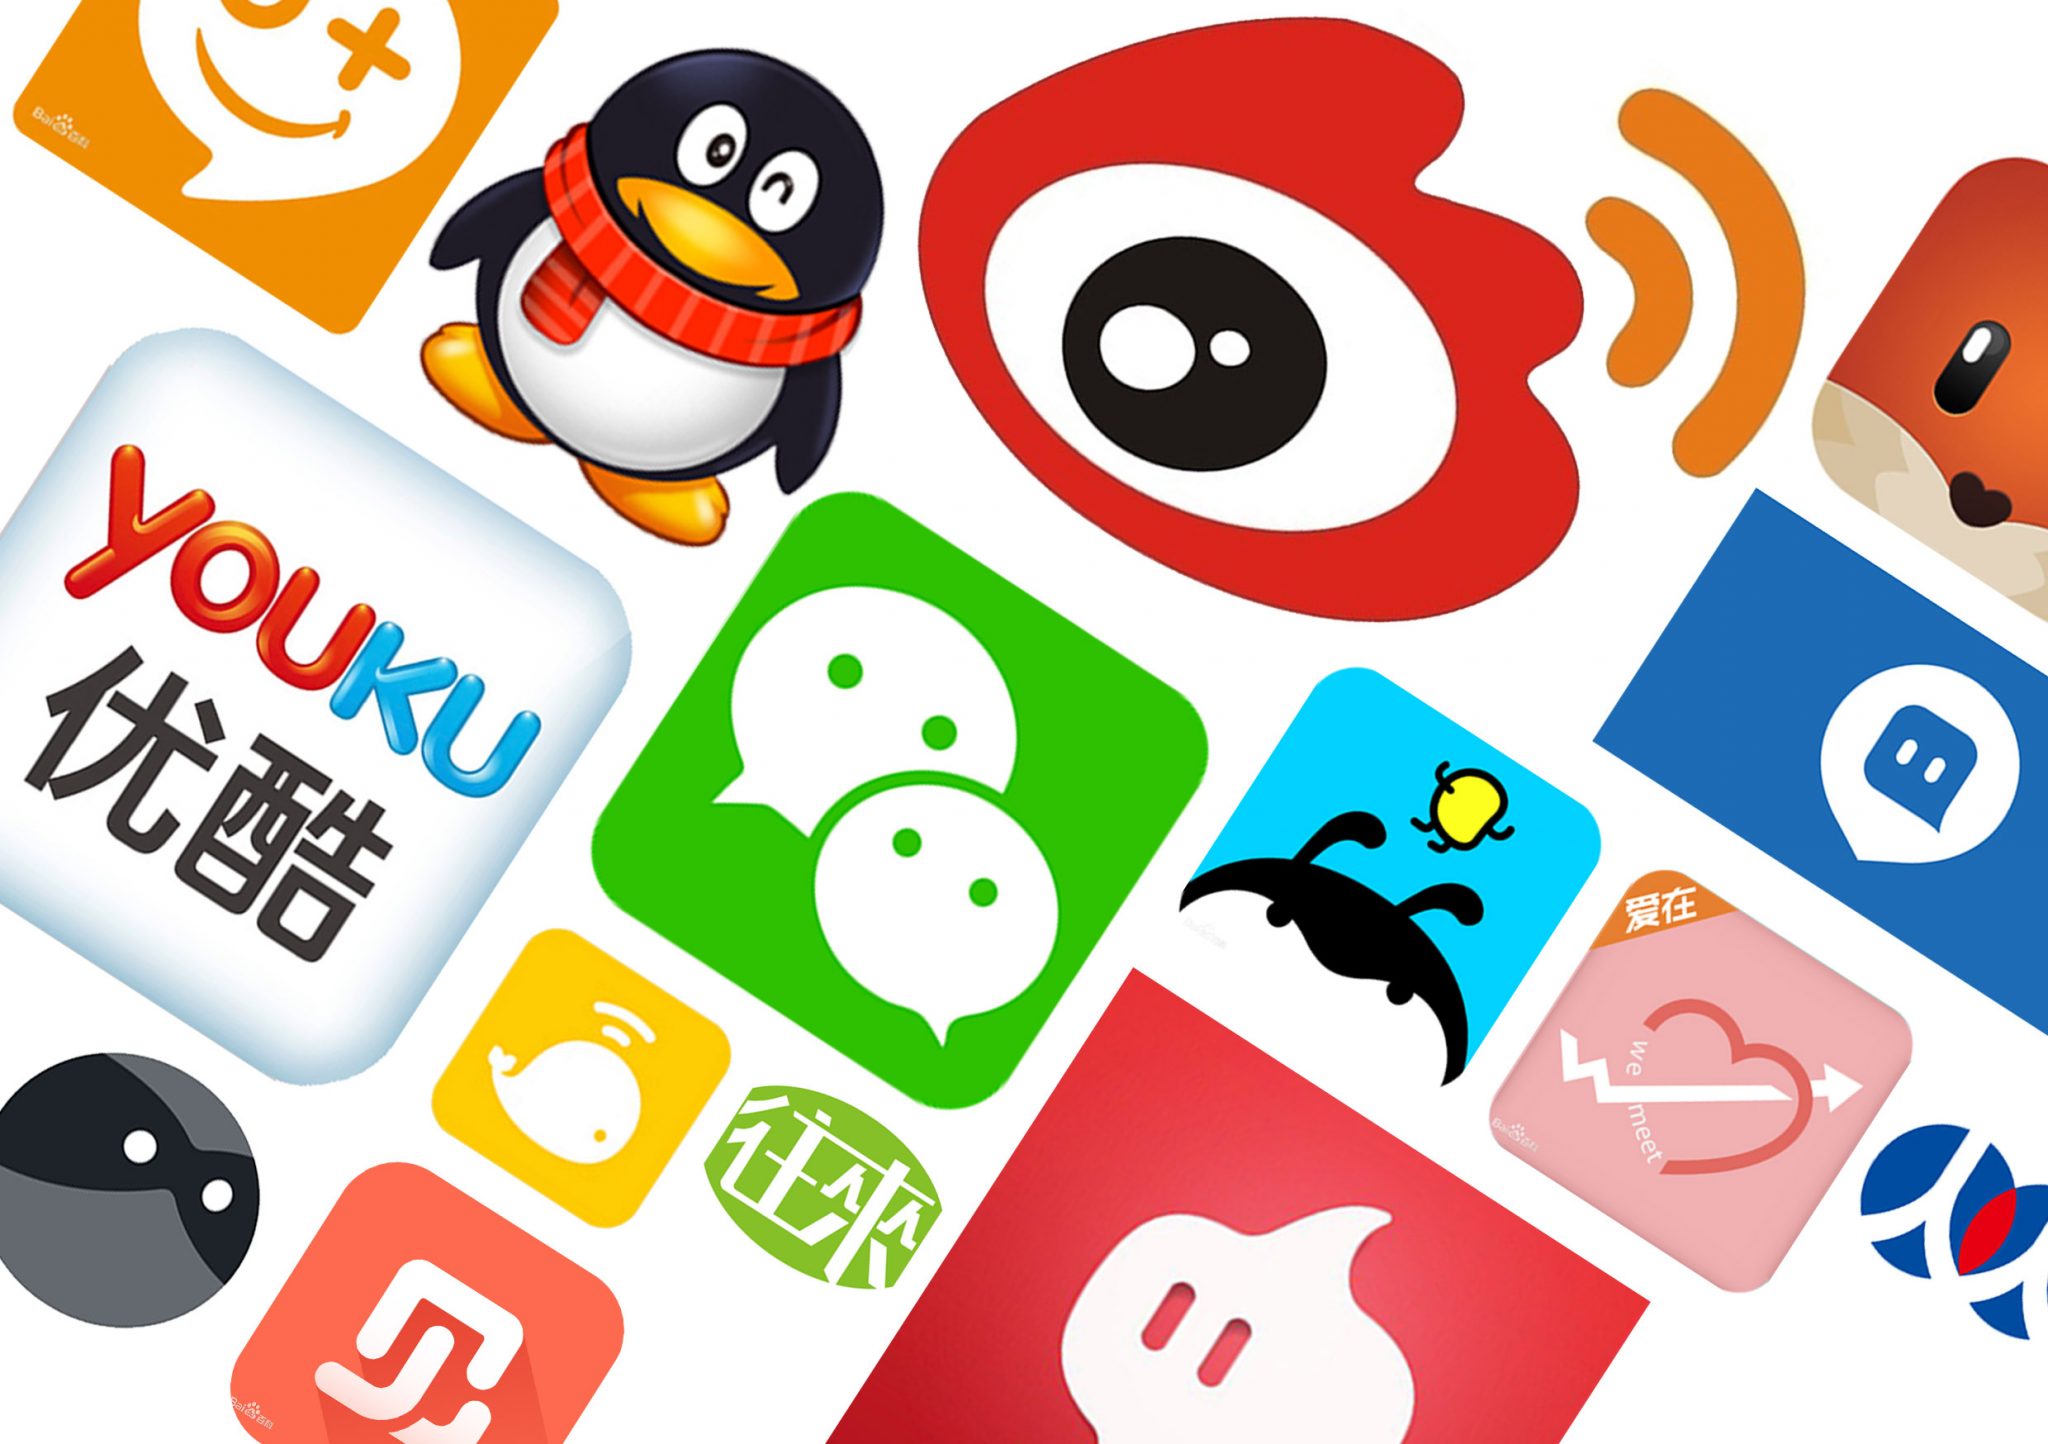 Chinese Social Media - Luxion Media